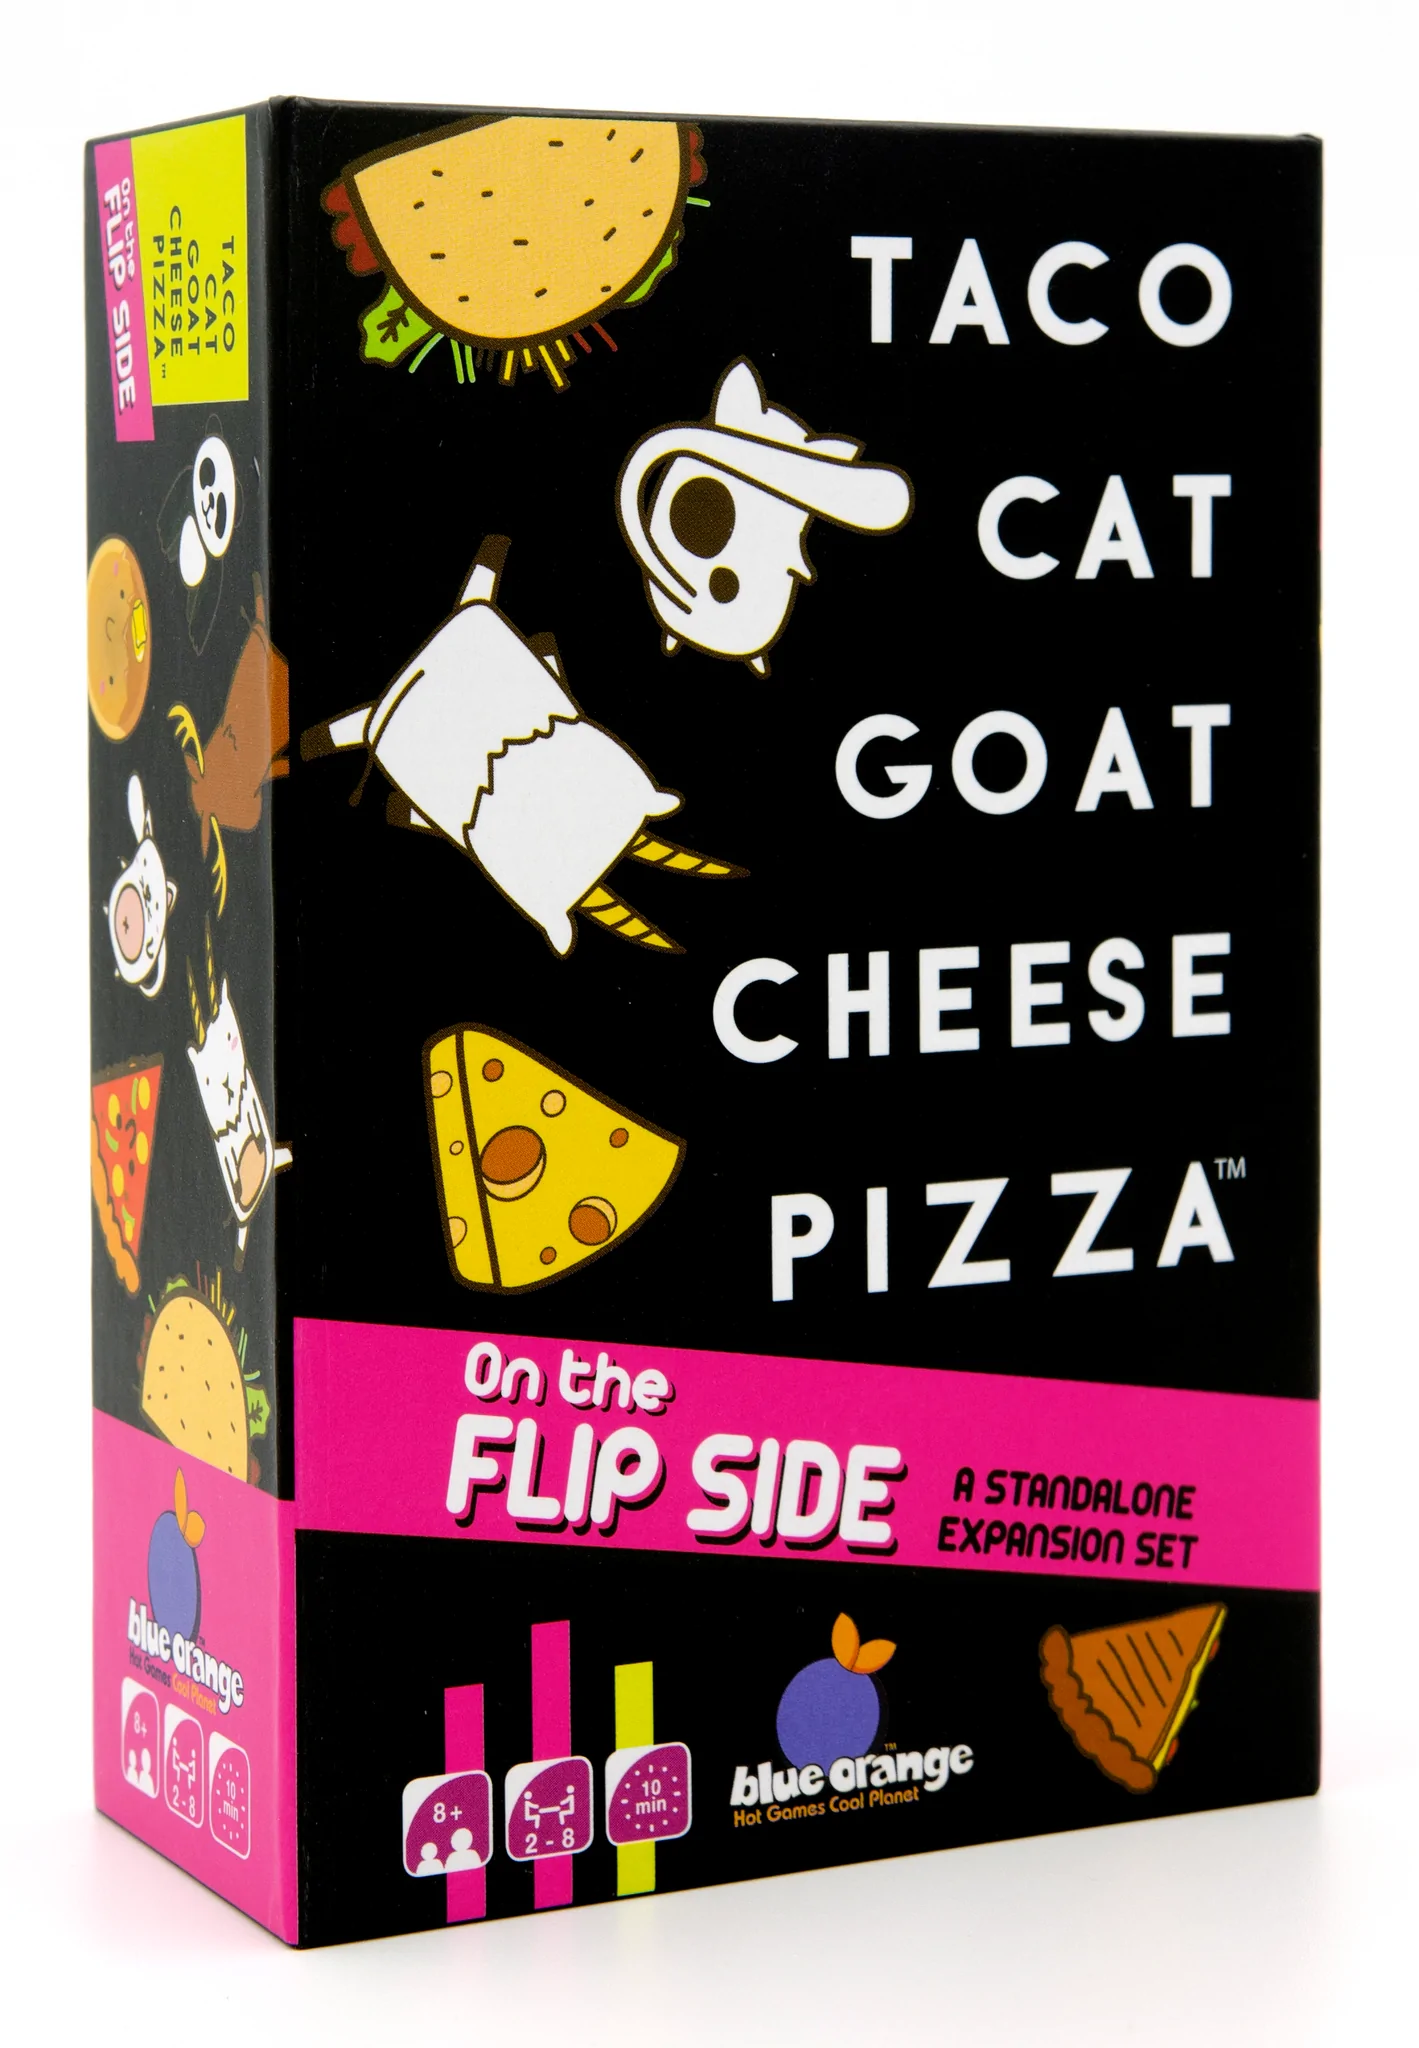 Taco Cat Goat Cheese Pizza on the flip side